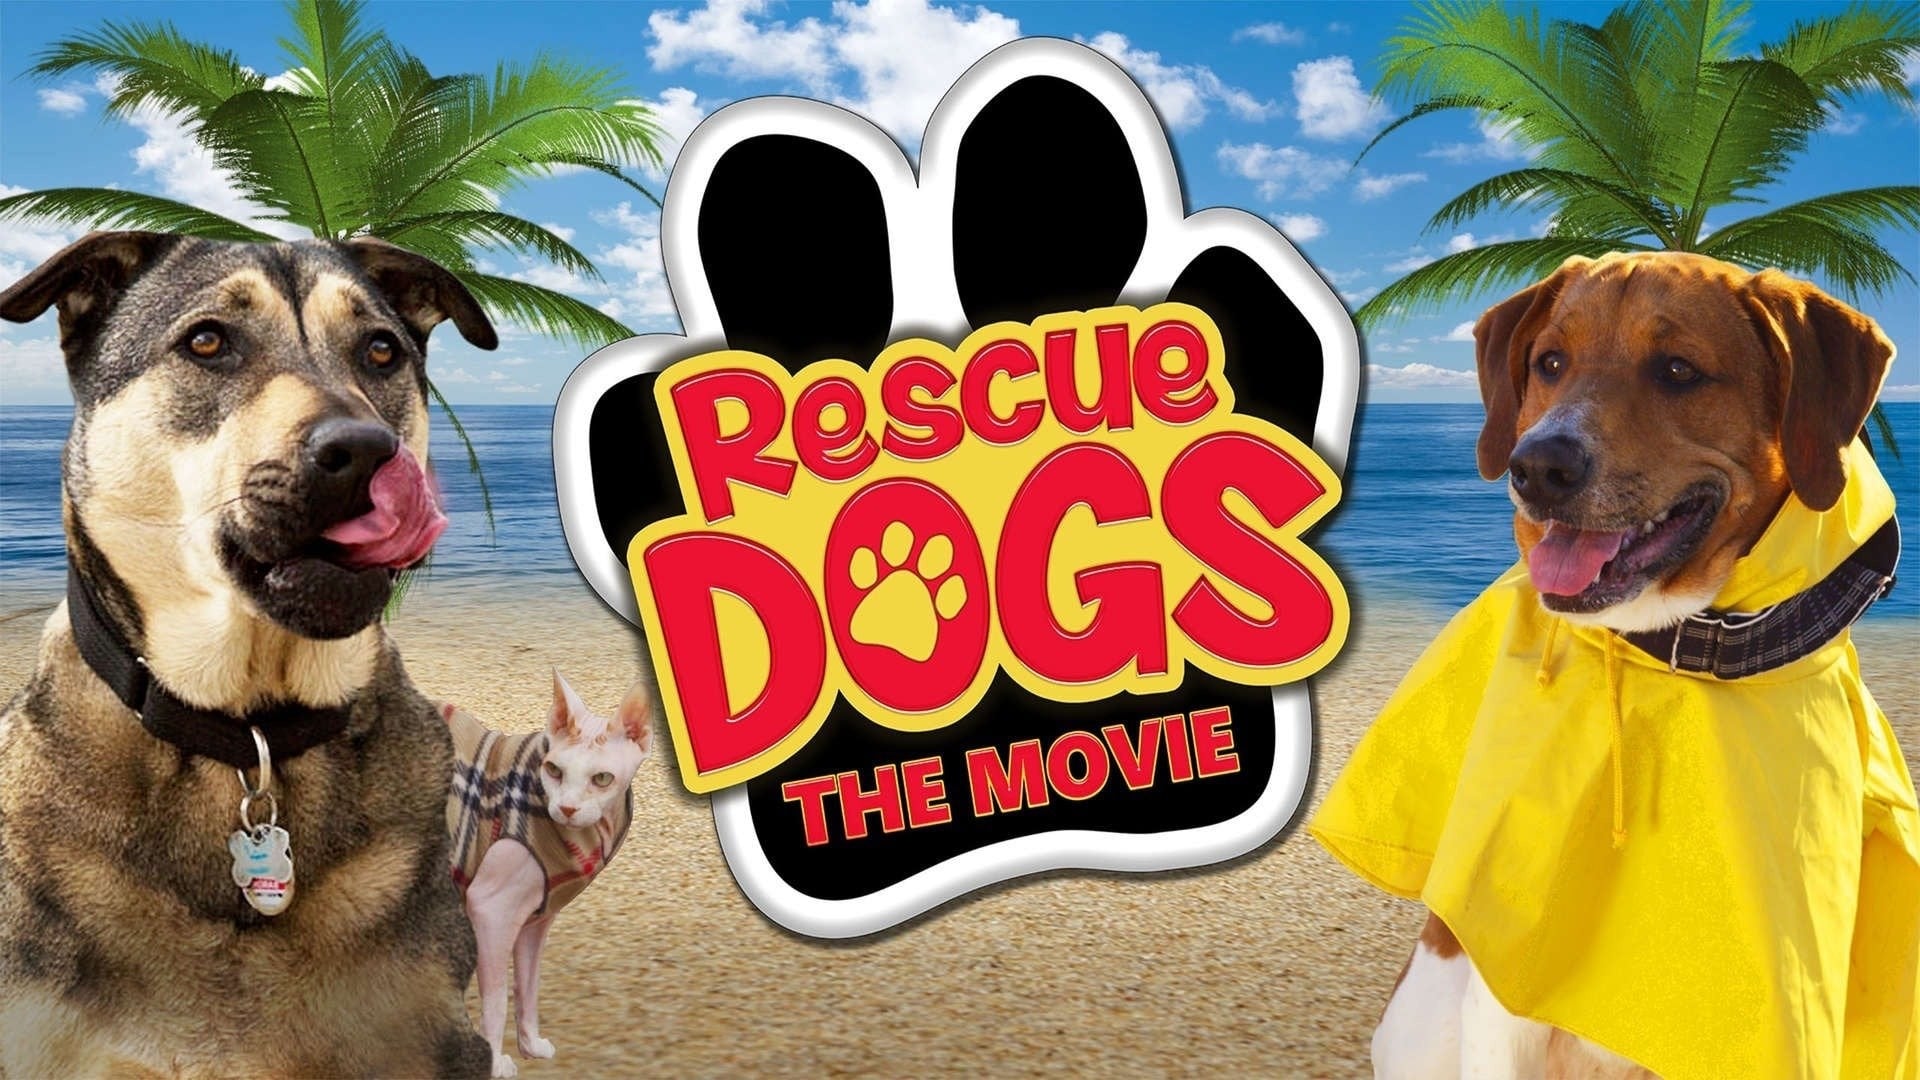 Watch Rescue Dogs(2016) Online Free, Rescue Dogs Full